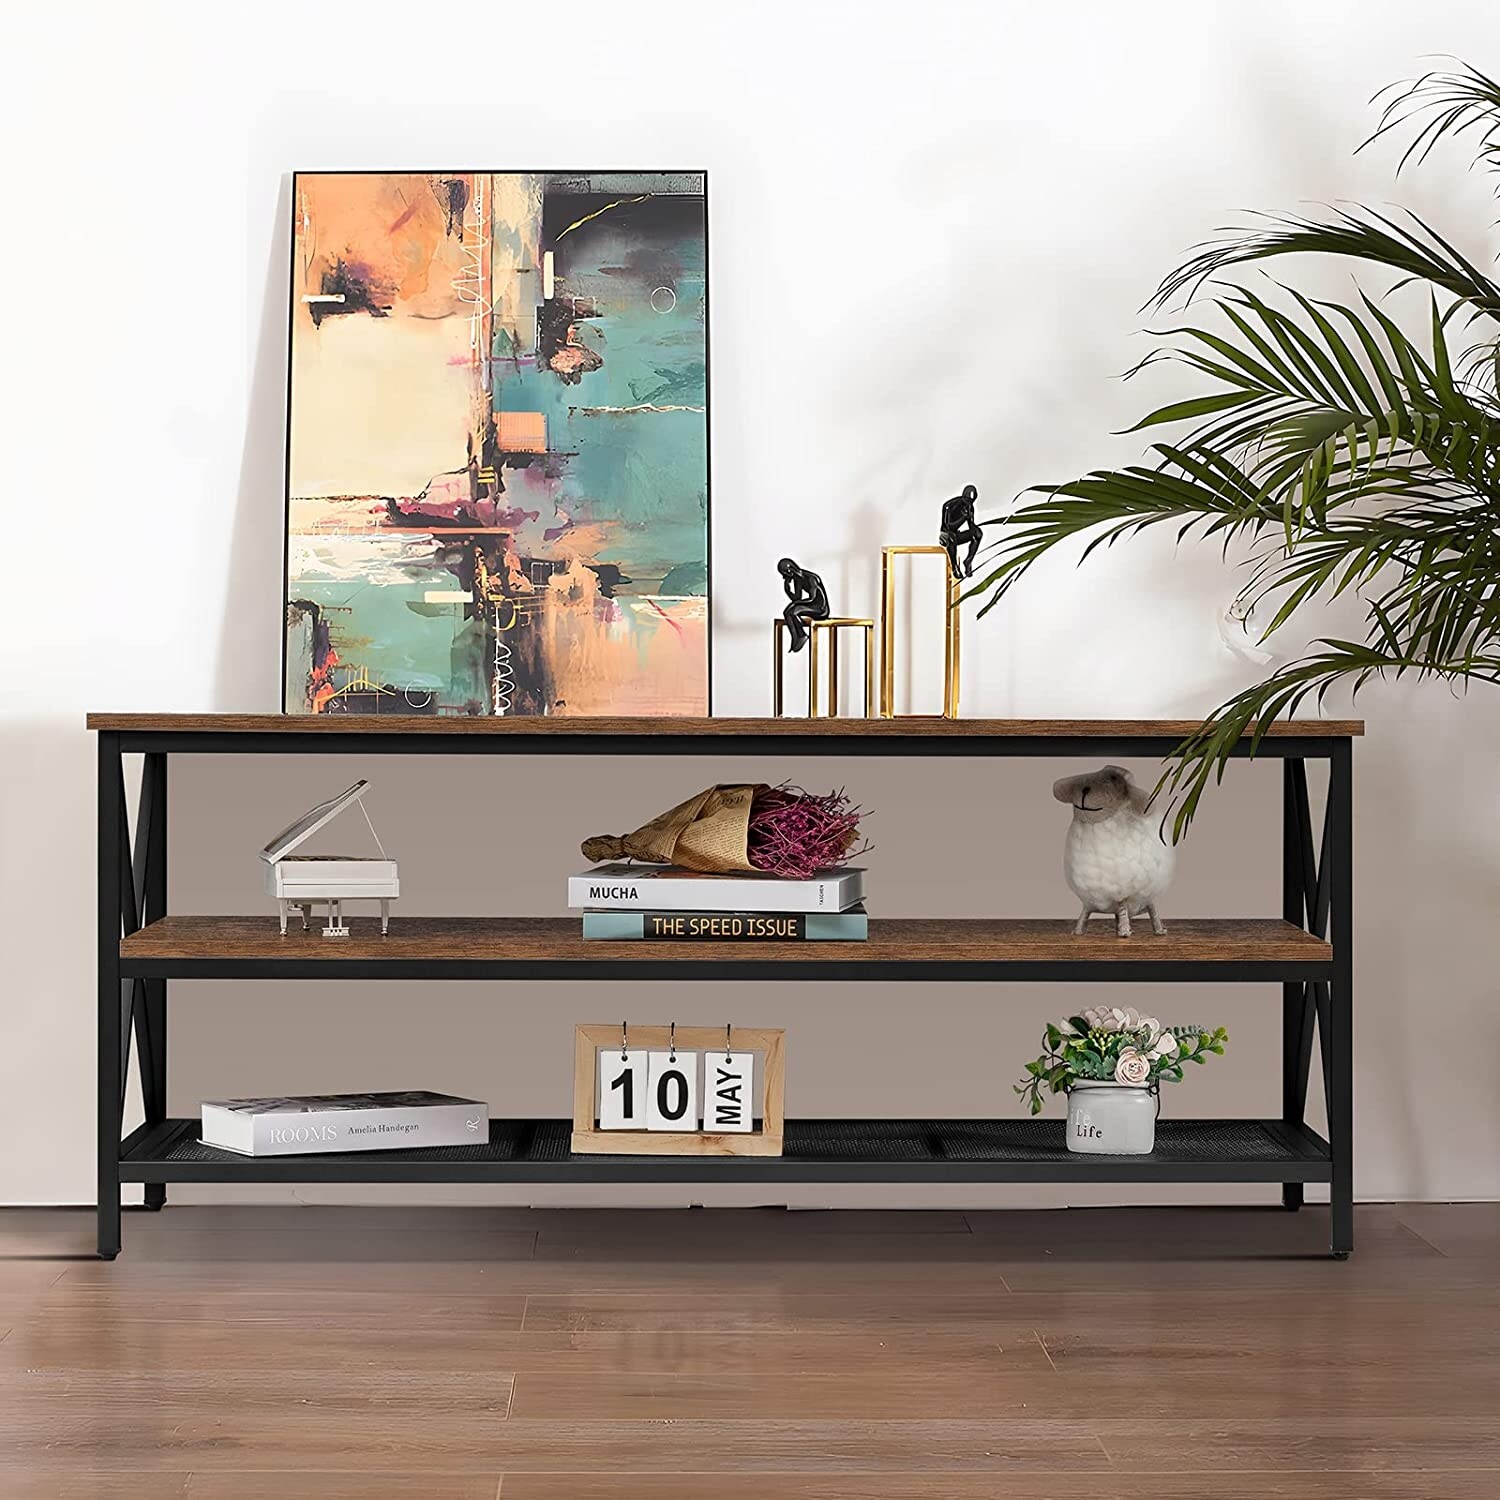 Wood TV Stand for 55 Inch TV, 47 Inch Long Metal Low TV Table with Adjustable Leg, Unique Rustic Storage Shelve for Living Room